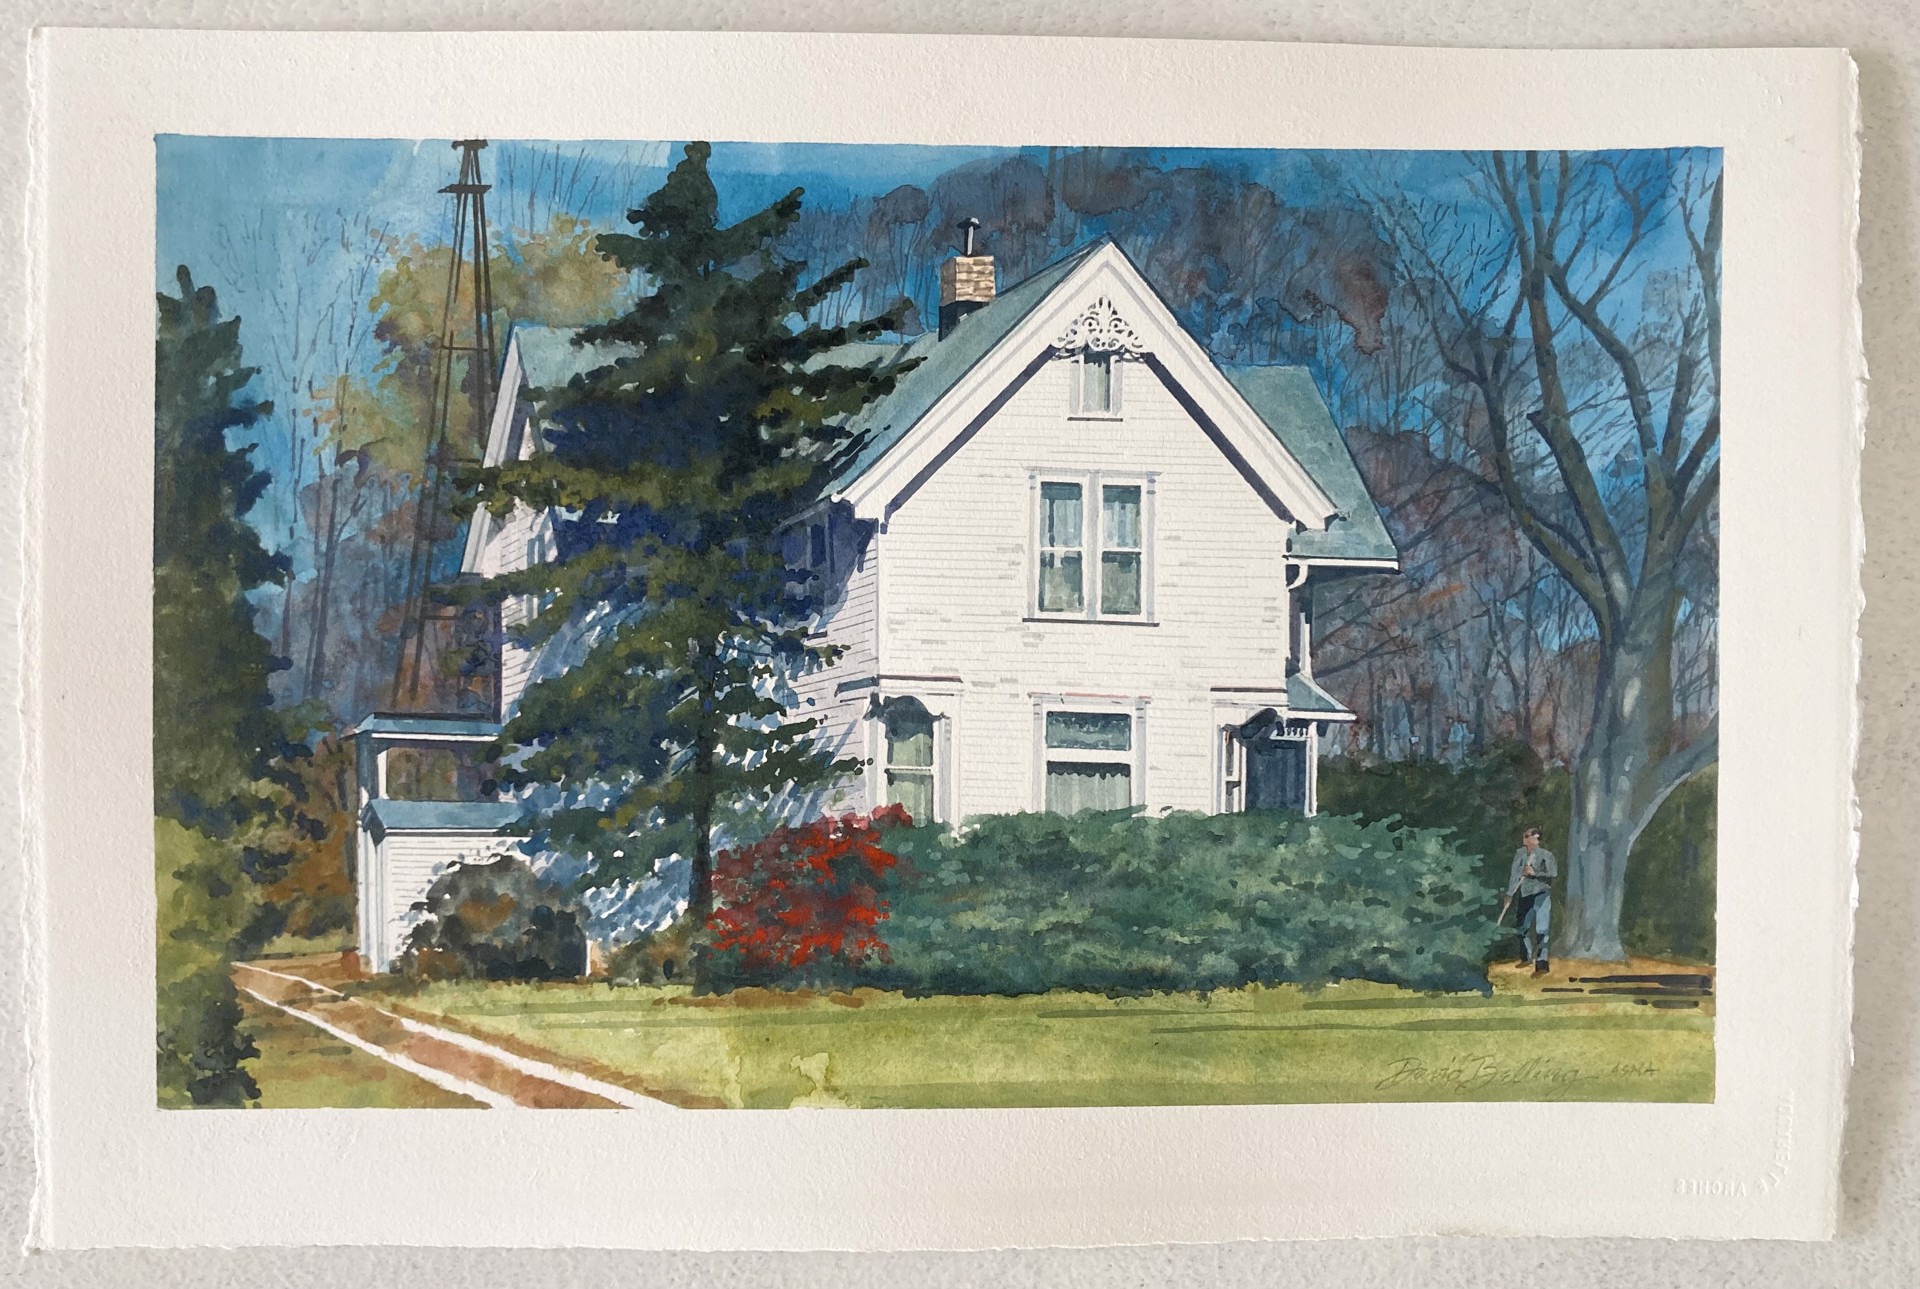 The White House/Unframed Original by David Belling